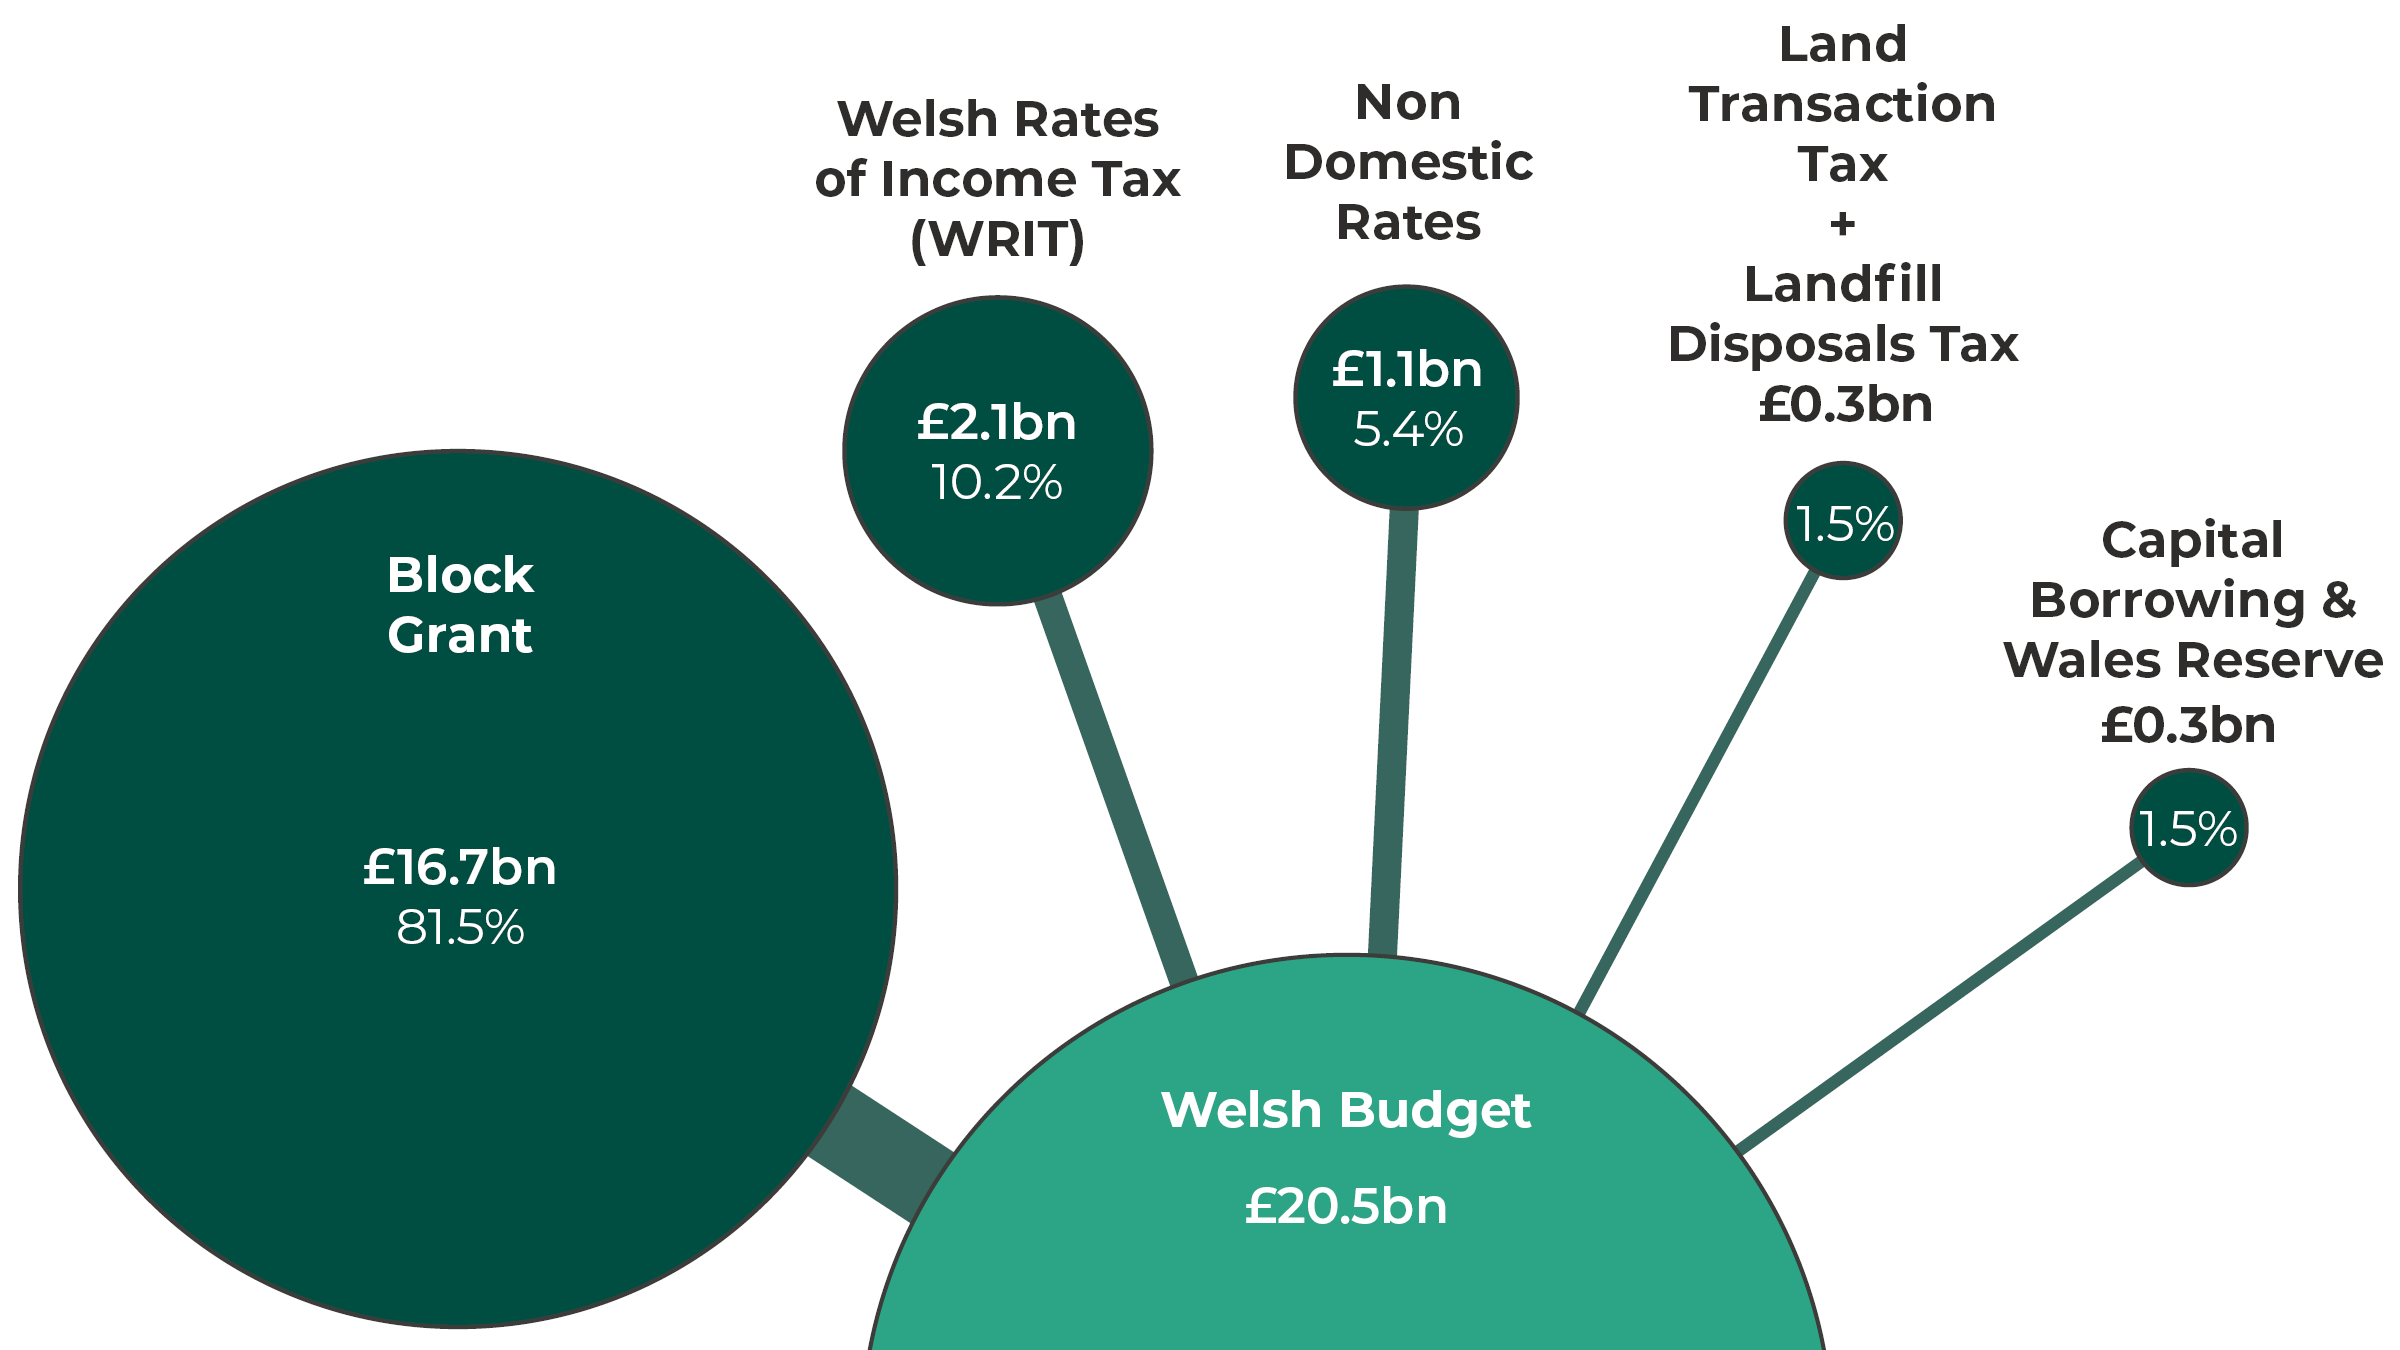 Infographic showing the composition of the 2021-22 Welsh budget. Welsh block grant £16.7 billion (82.6%), Welsh rates of income tax £2.1 billion (10.5%), Non-domestic rates £1.1 billion (5.4%) and Land transaction tax and Landfill disposals tax combined £0.3 billion (1.5%).